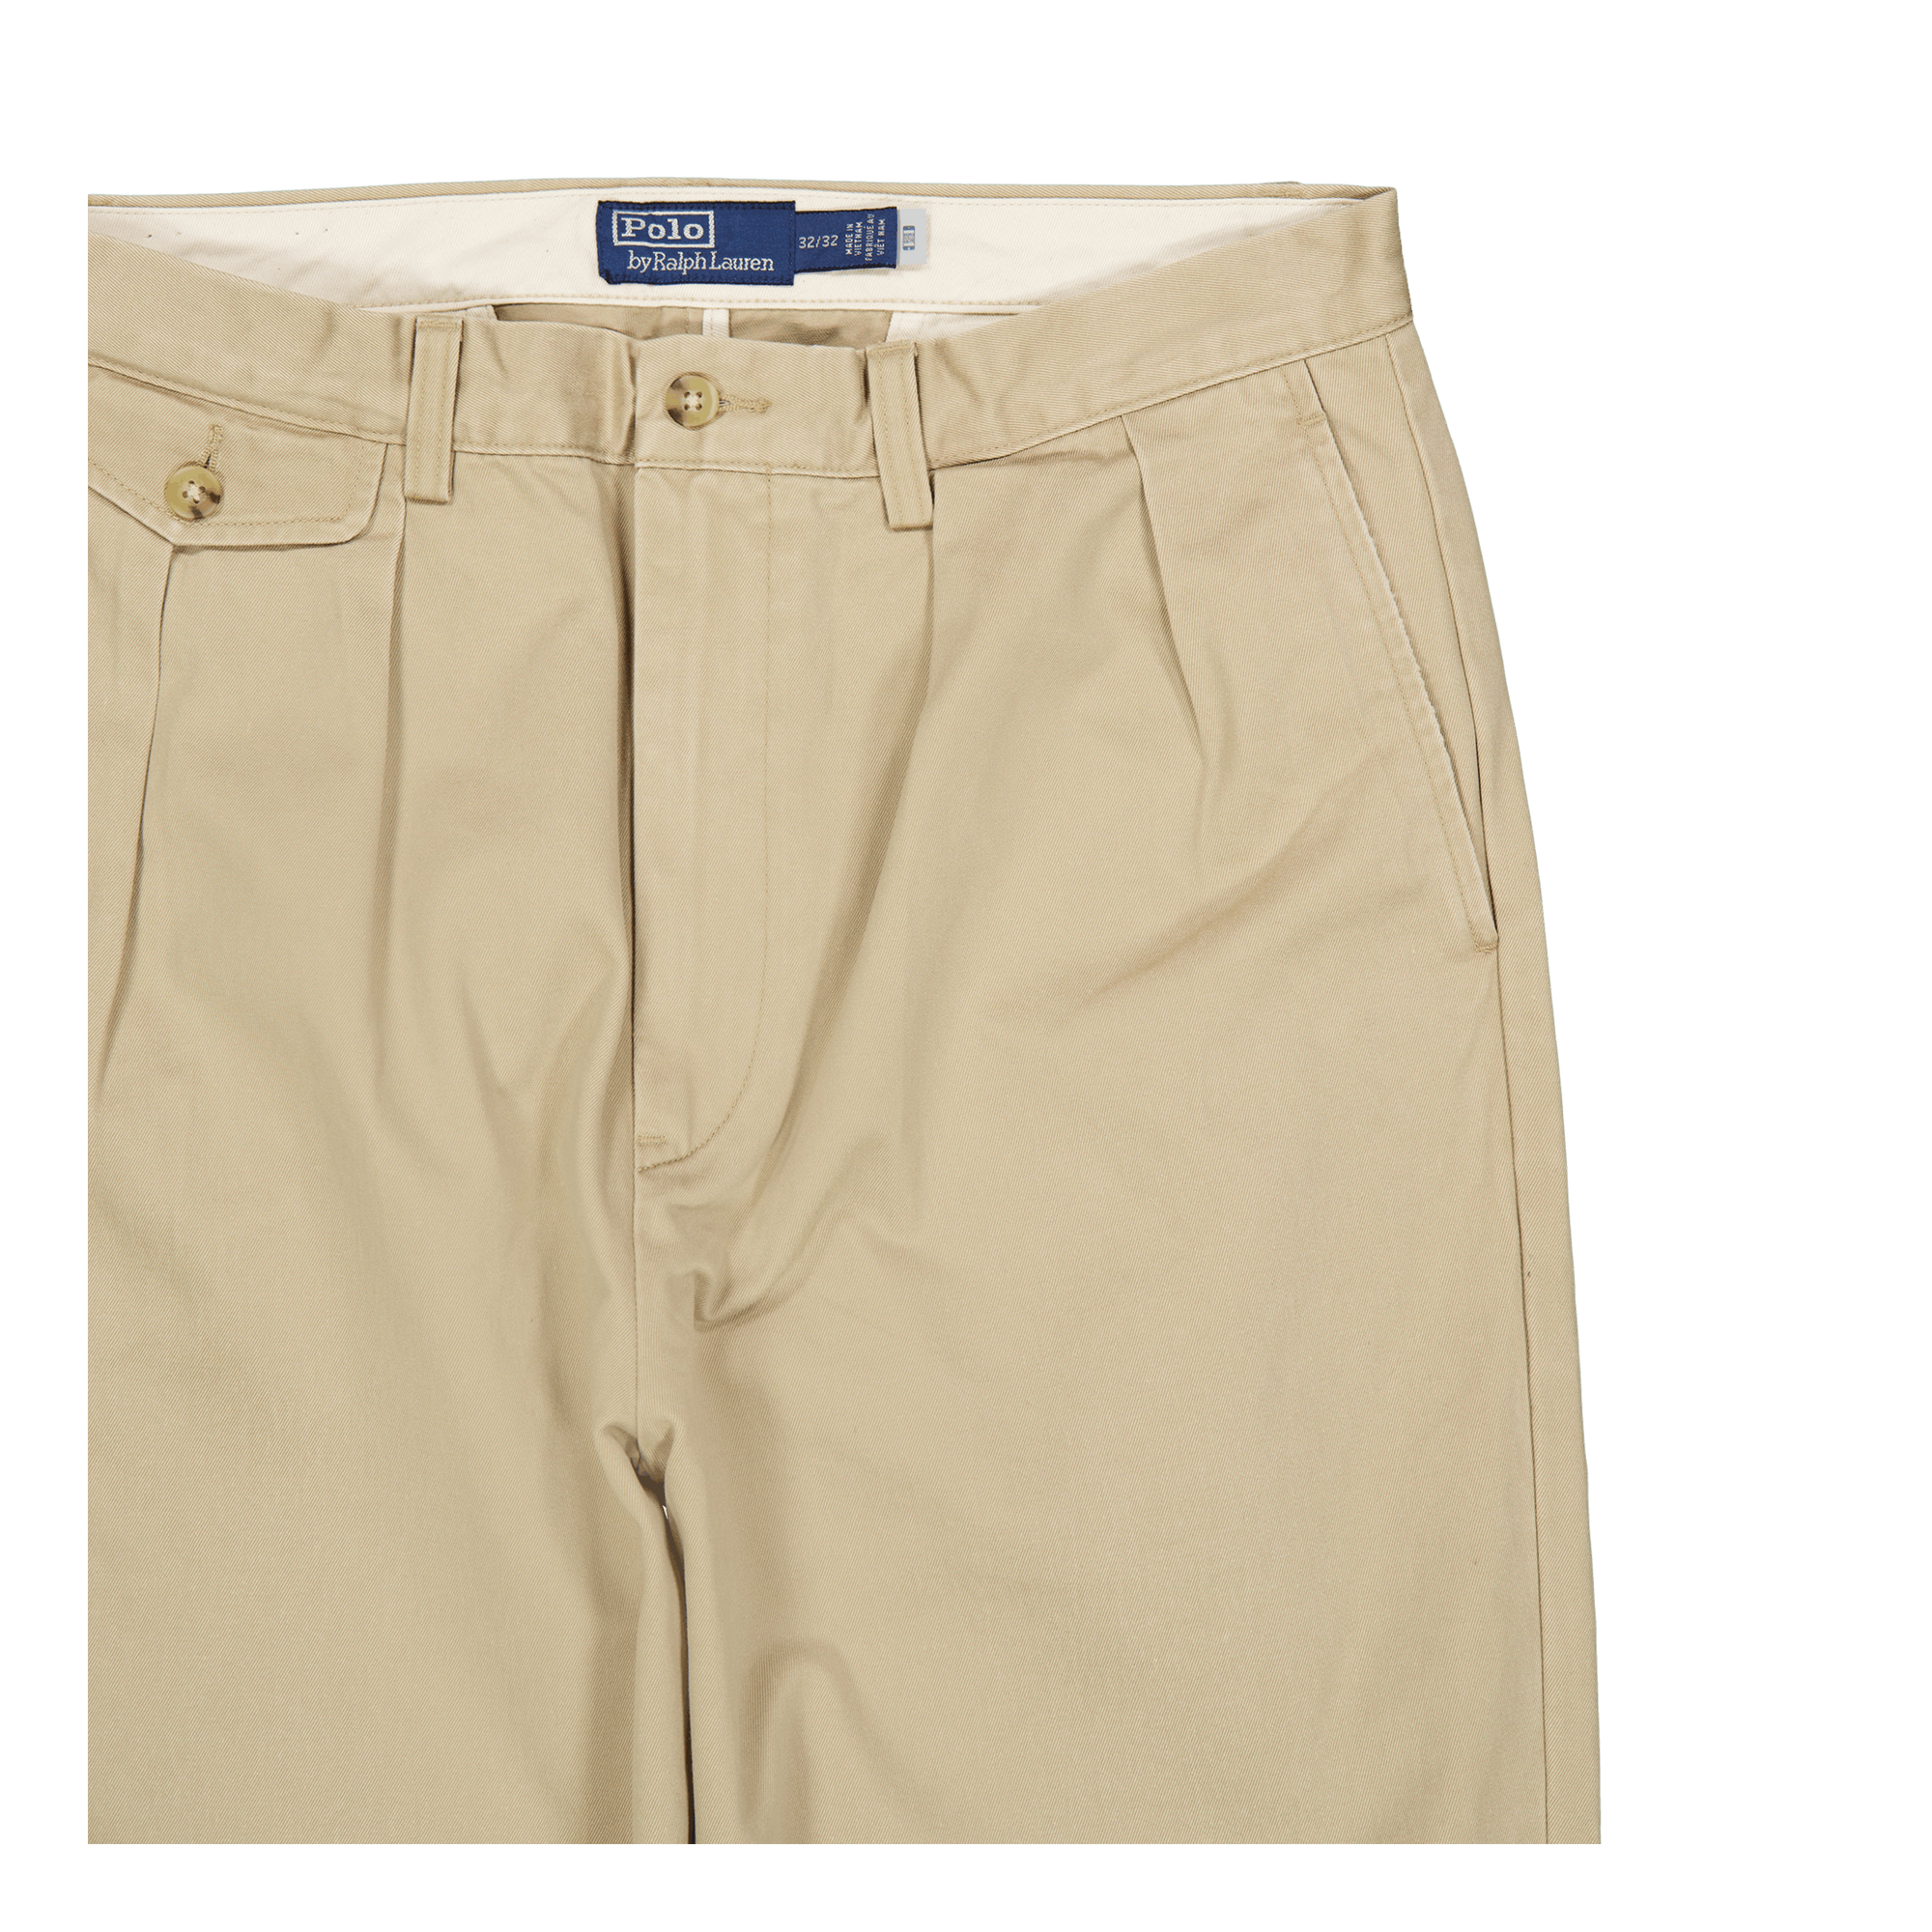 Whitman Relaxed Fit Pleated Chino Pant Rl Khaki